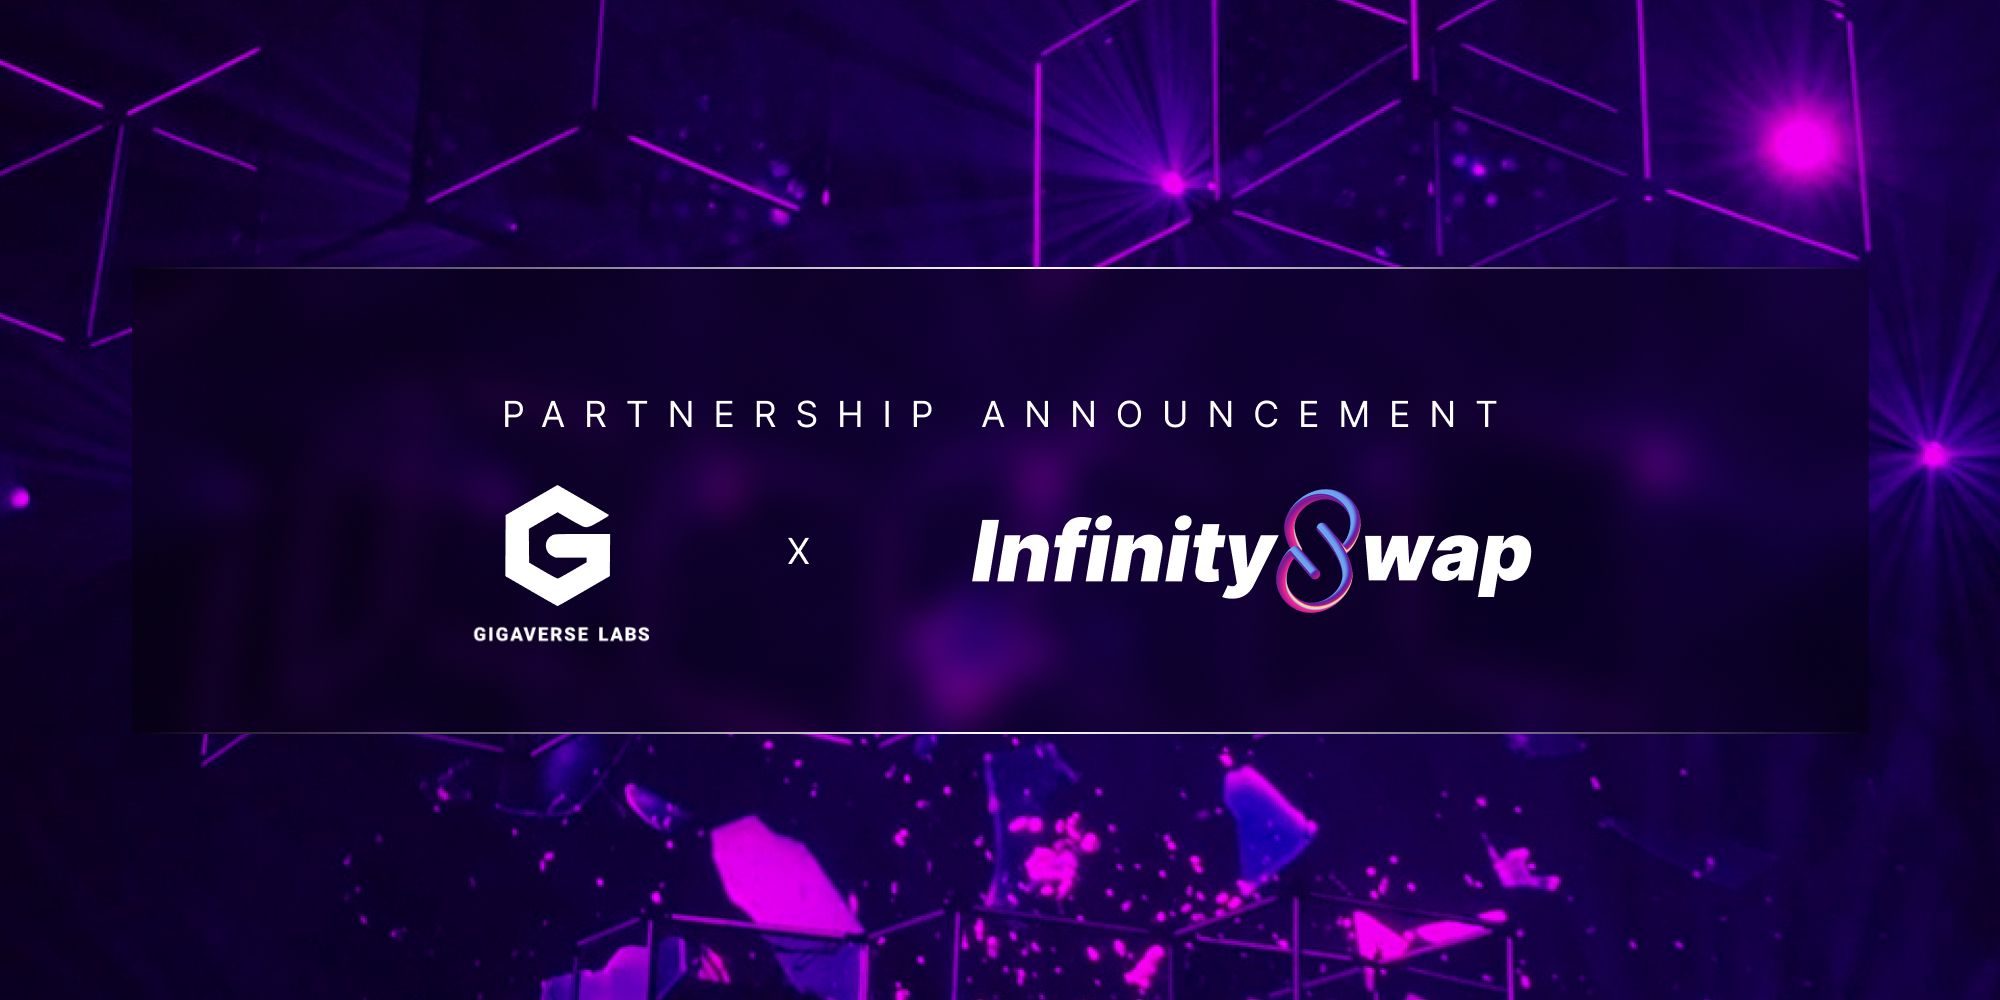 InfinitySwap Forms a Strategic Partnership with Gigaverse Labs